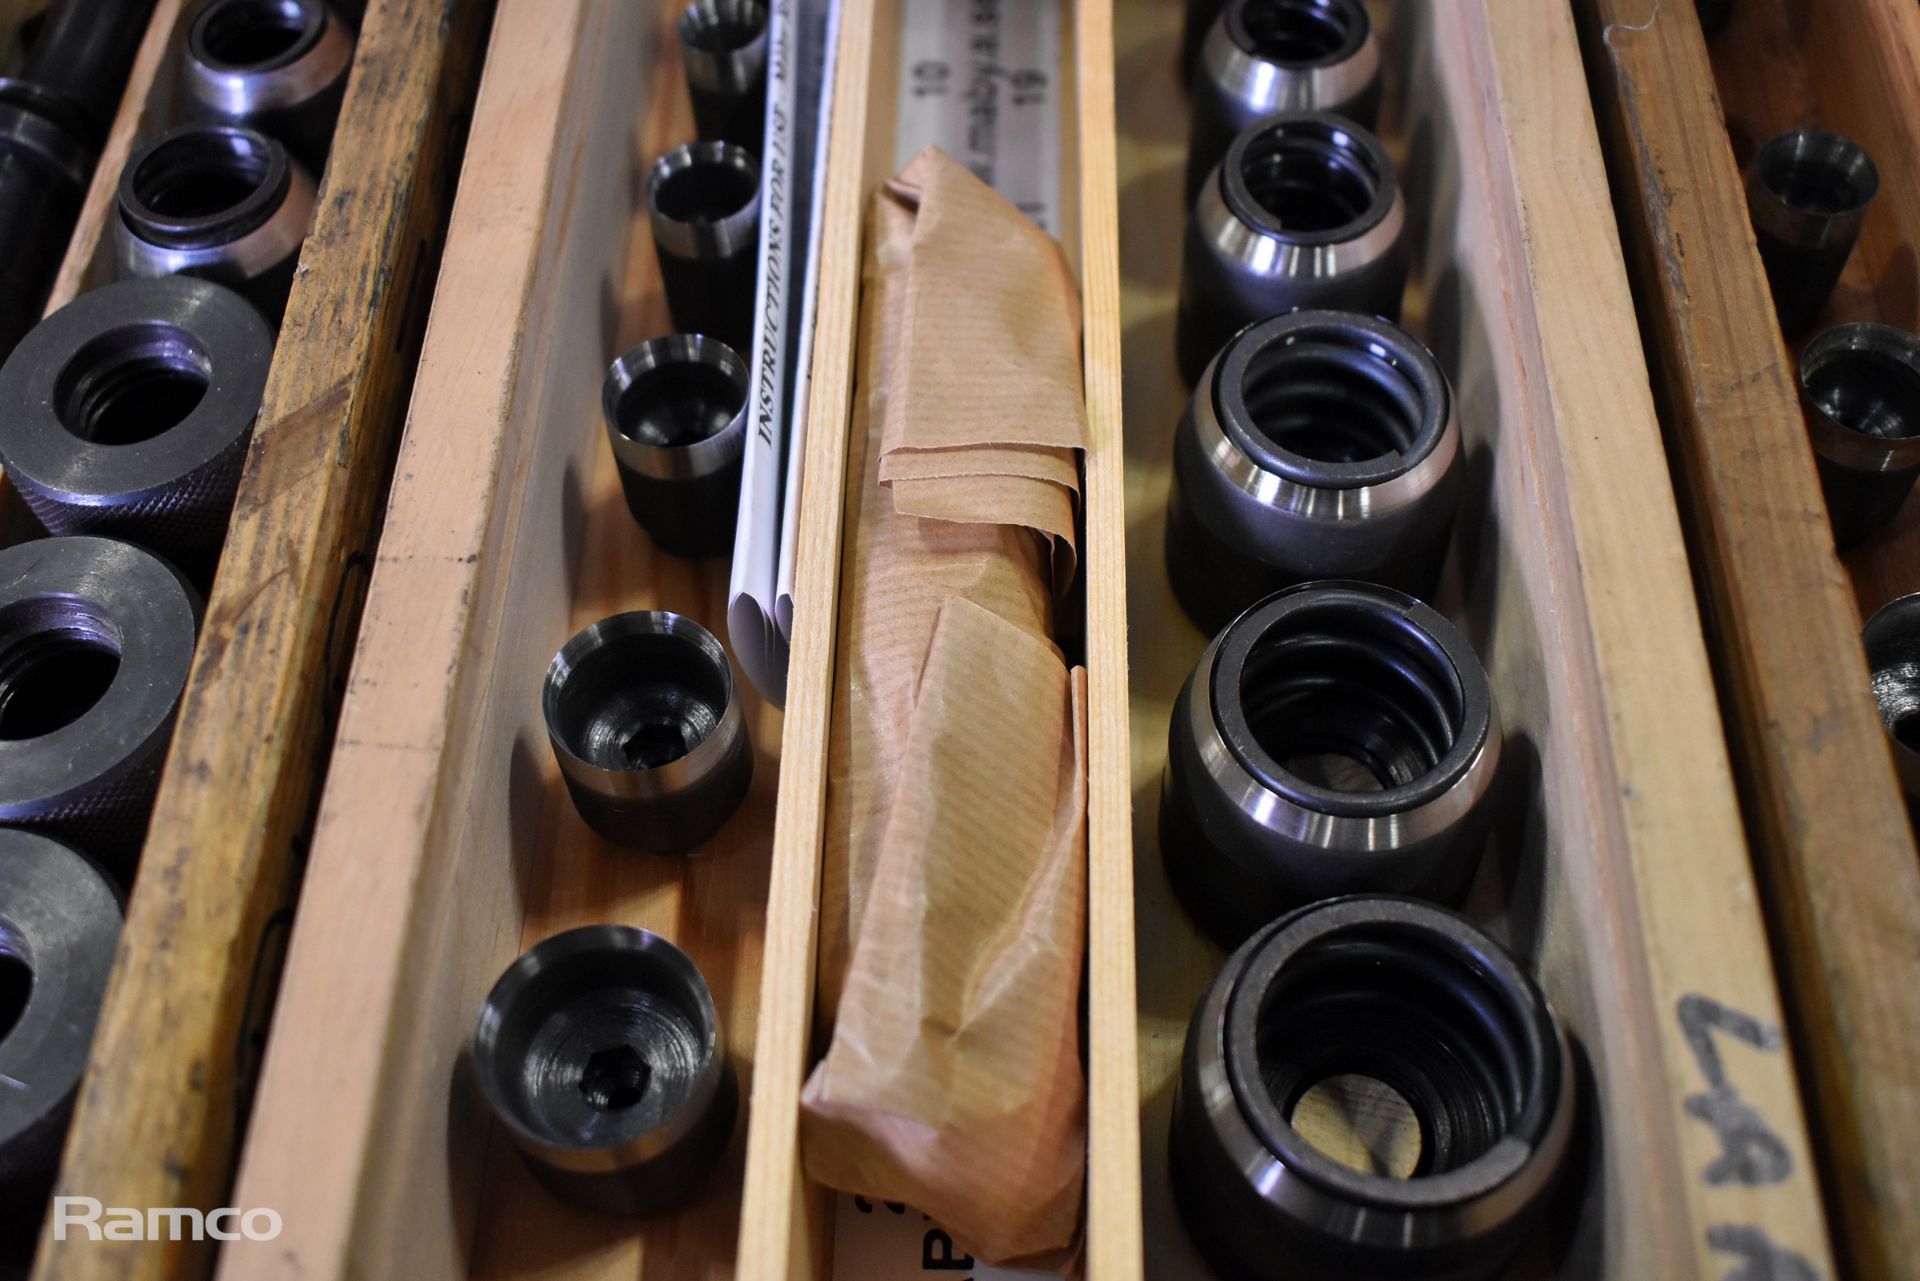 4x Maby Ring punch sets in wooden storage box - Image 5 of 7